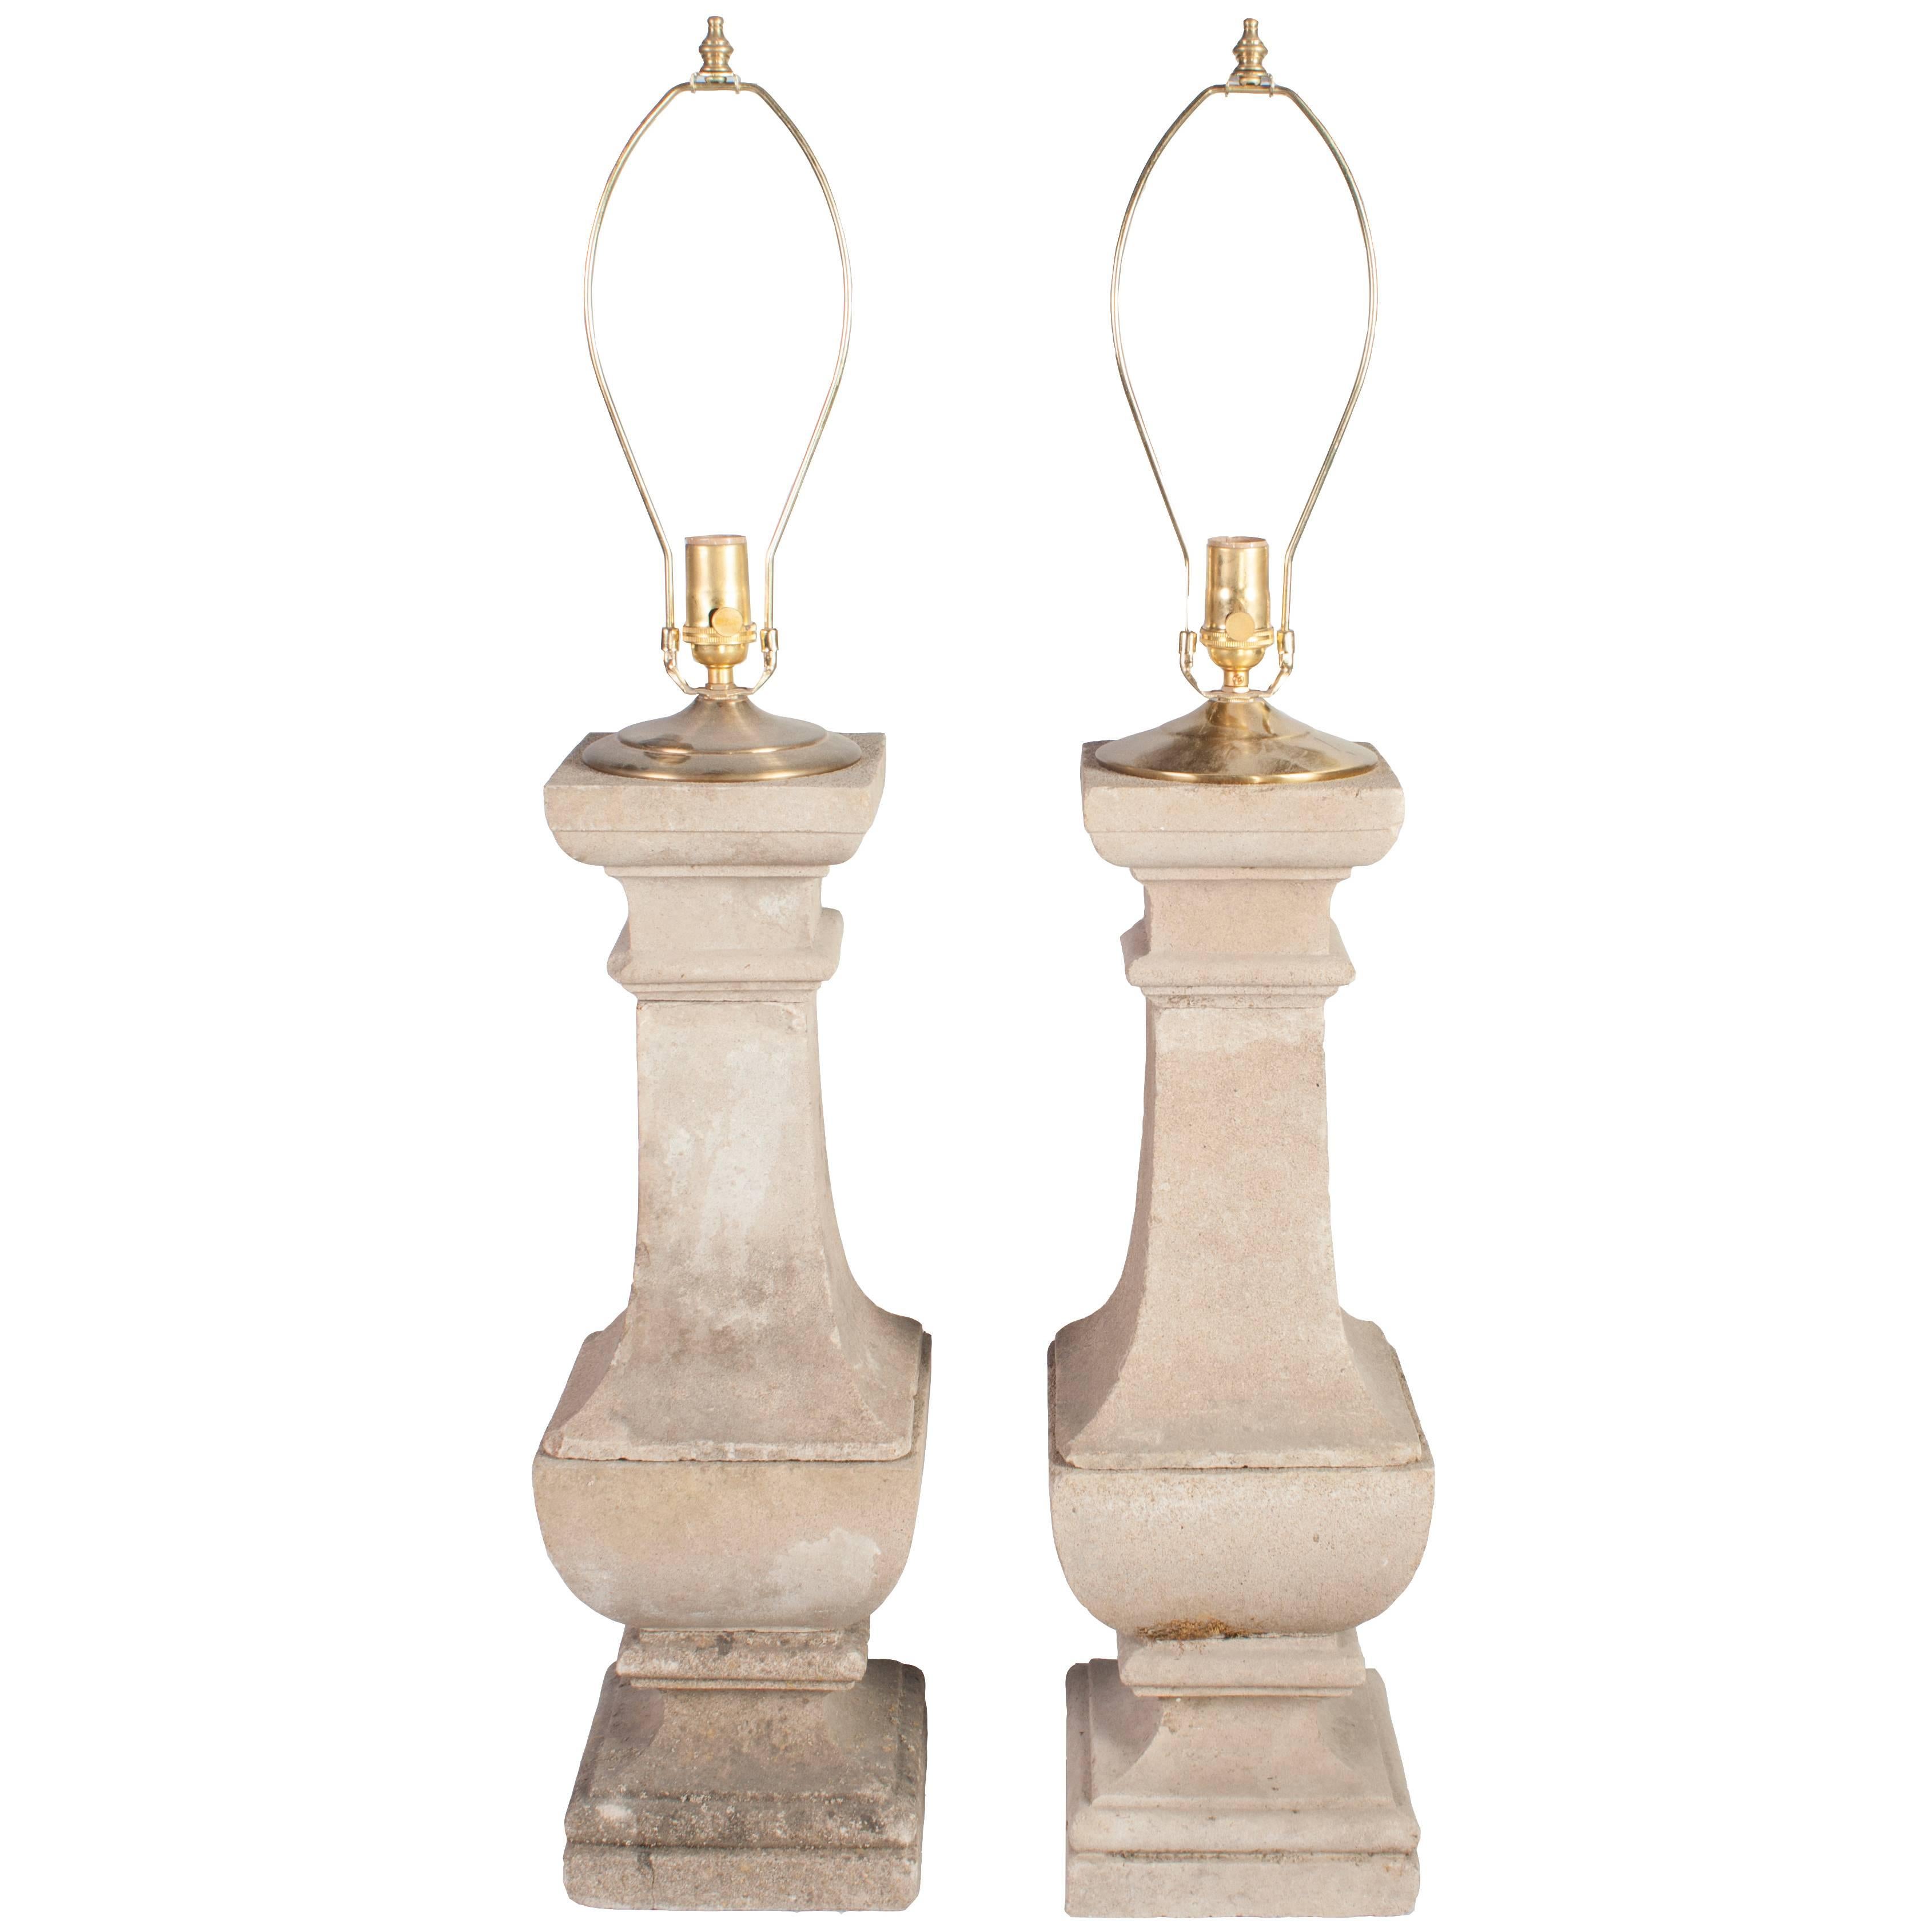 Pair of Composite Stone Baluster Lamps